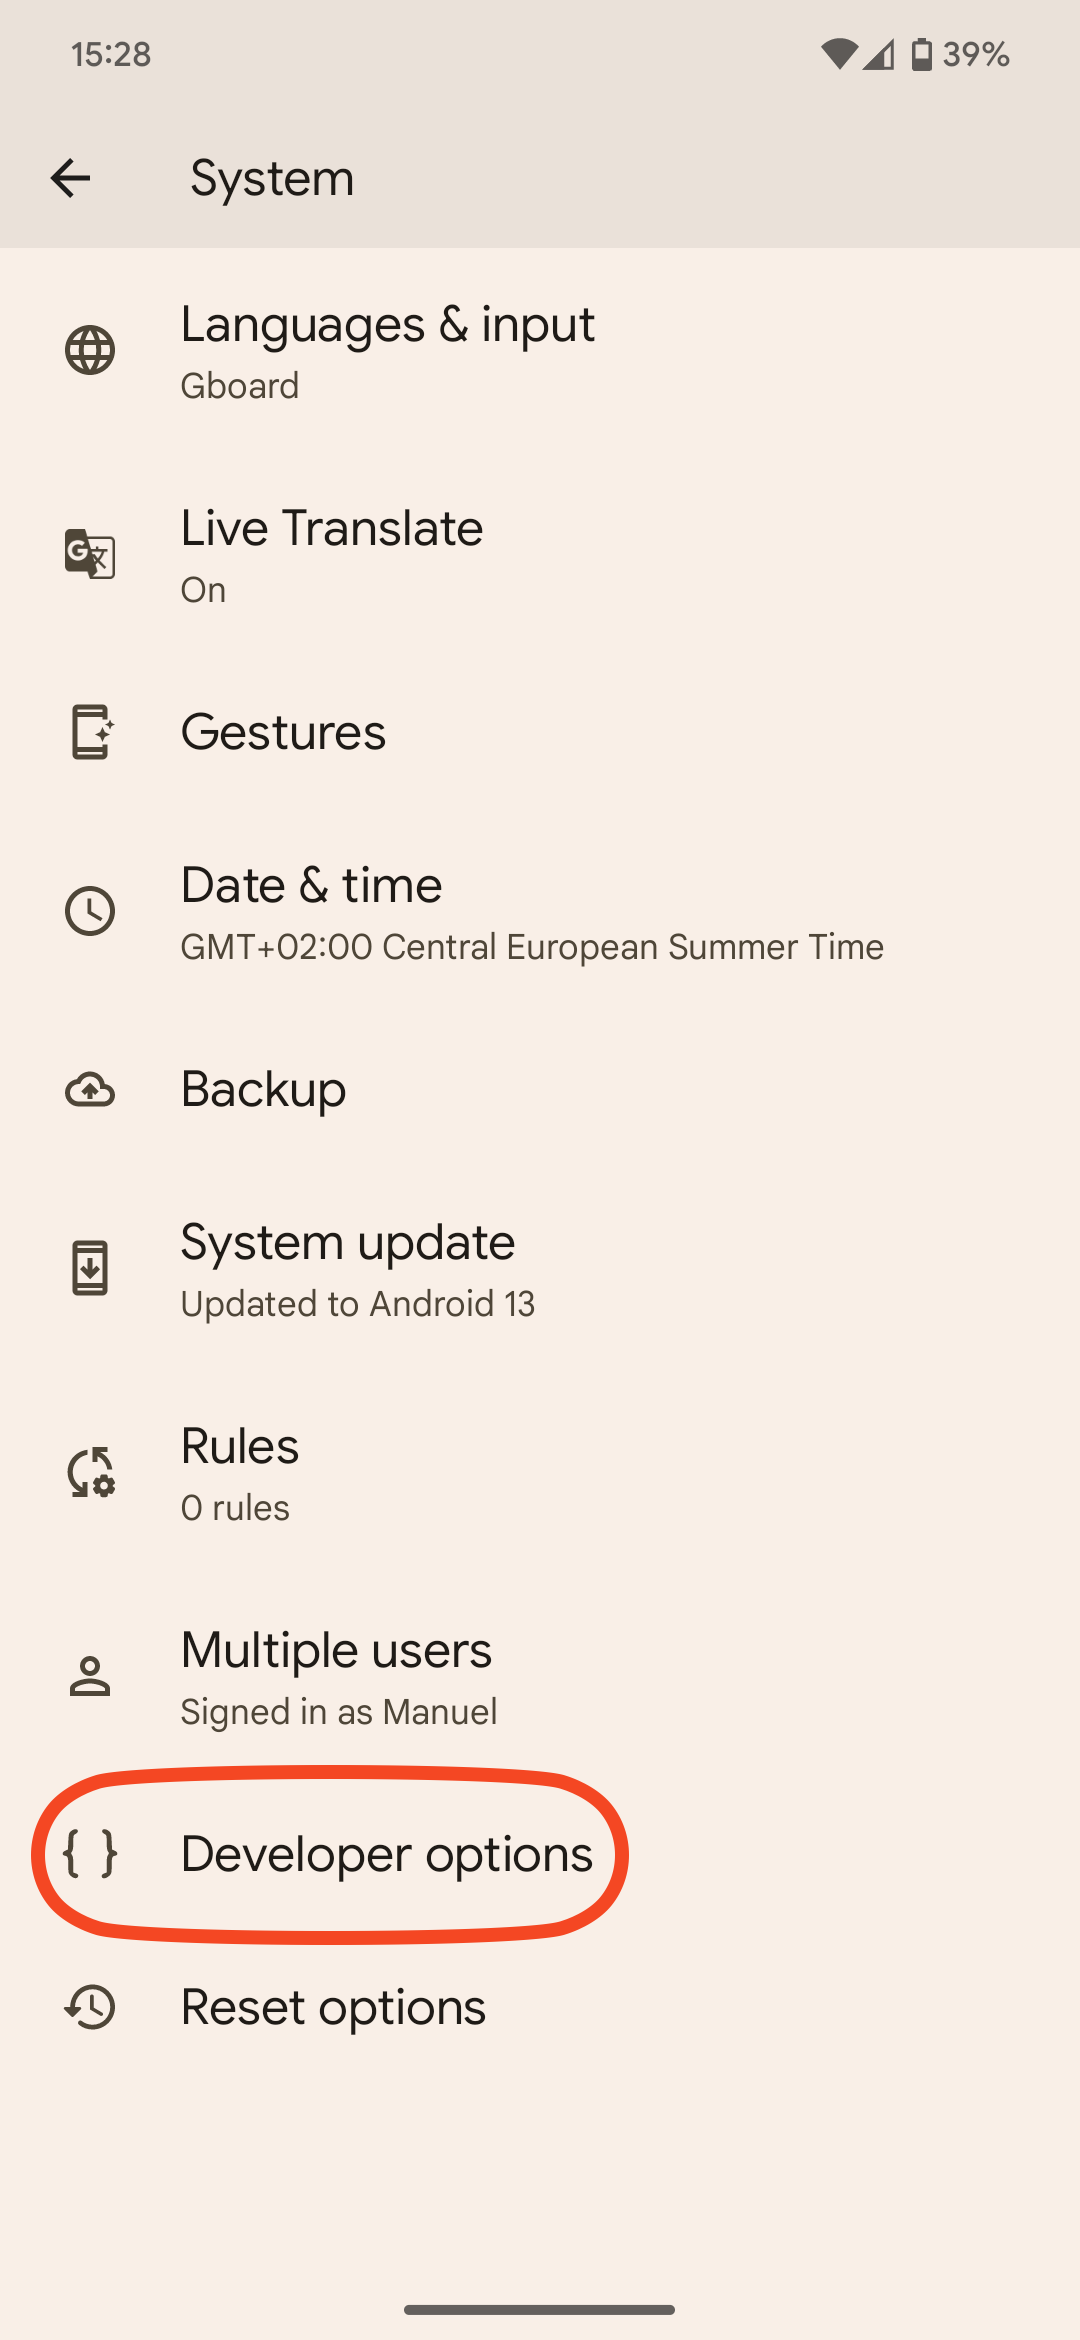 Screenshot showing the Developer options in Android 13's system settings' system section